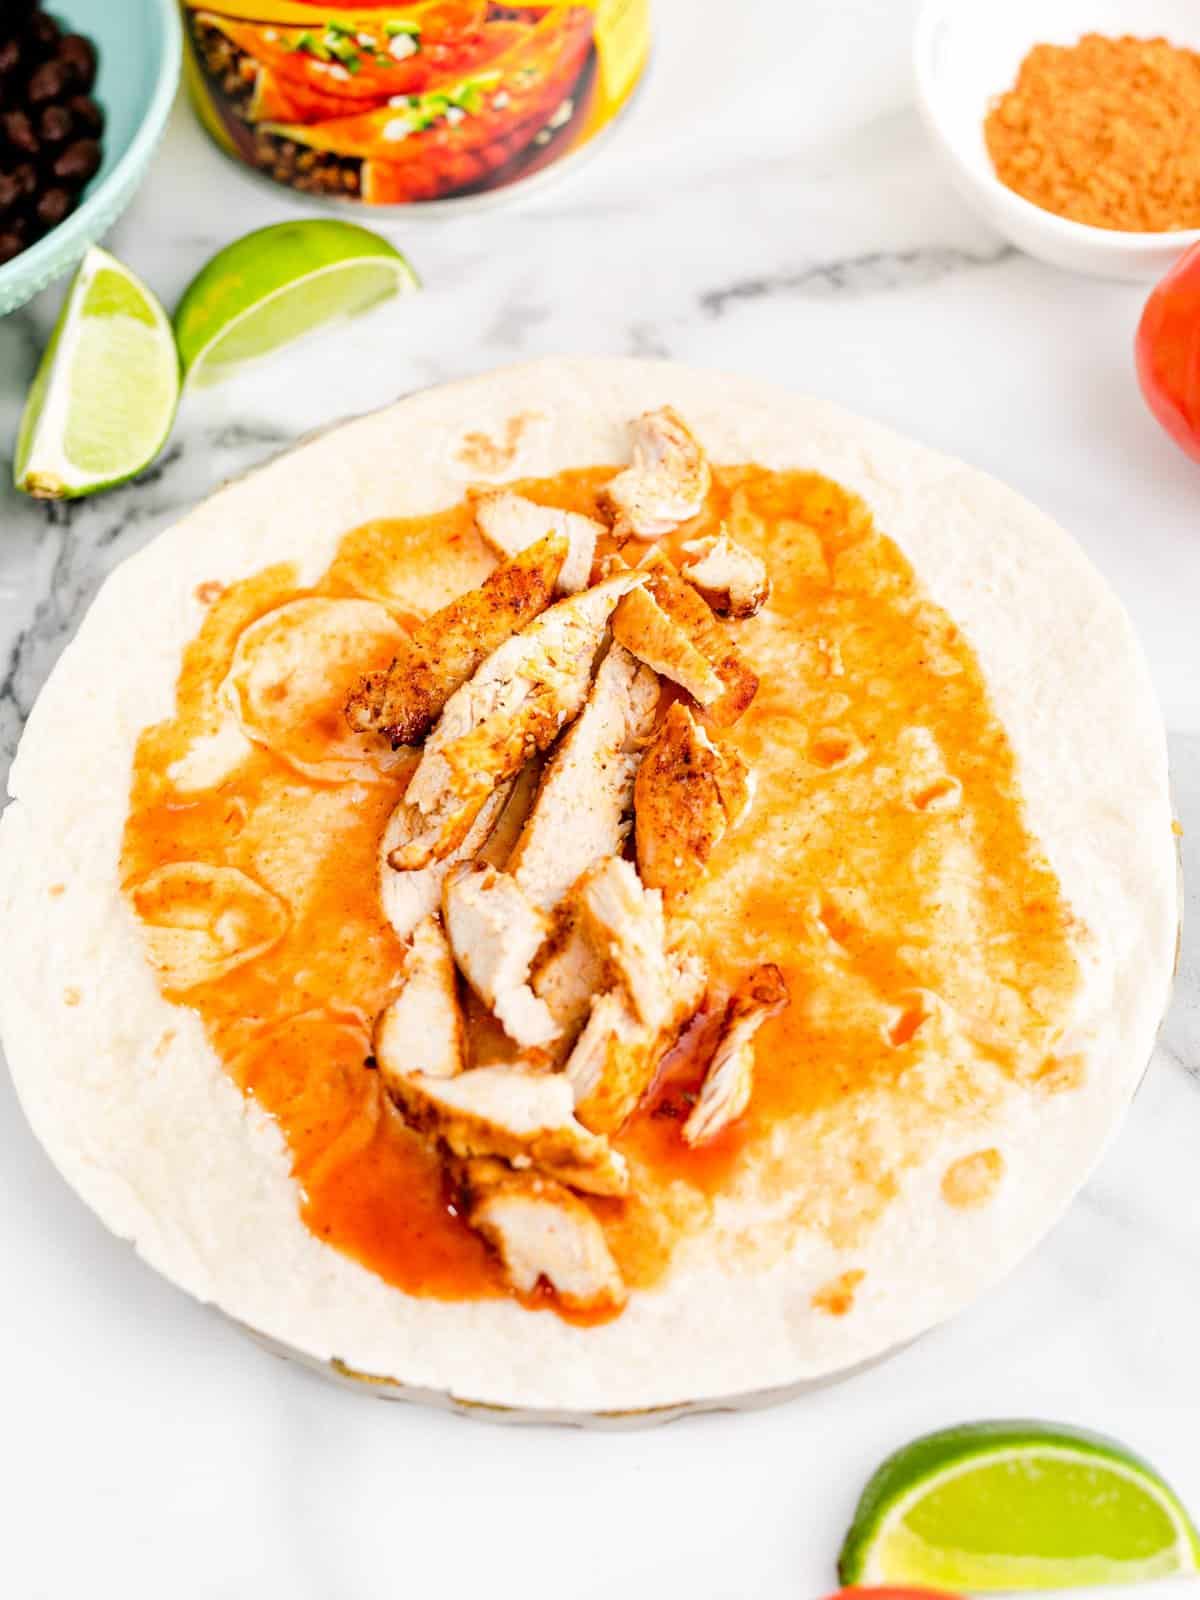 sliced chicken placed in the center of the flour tortilla.